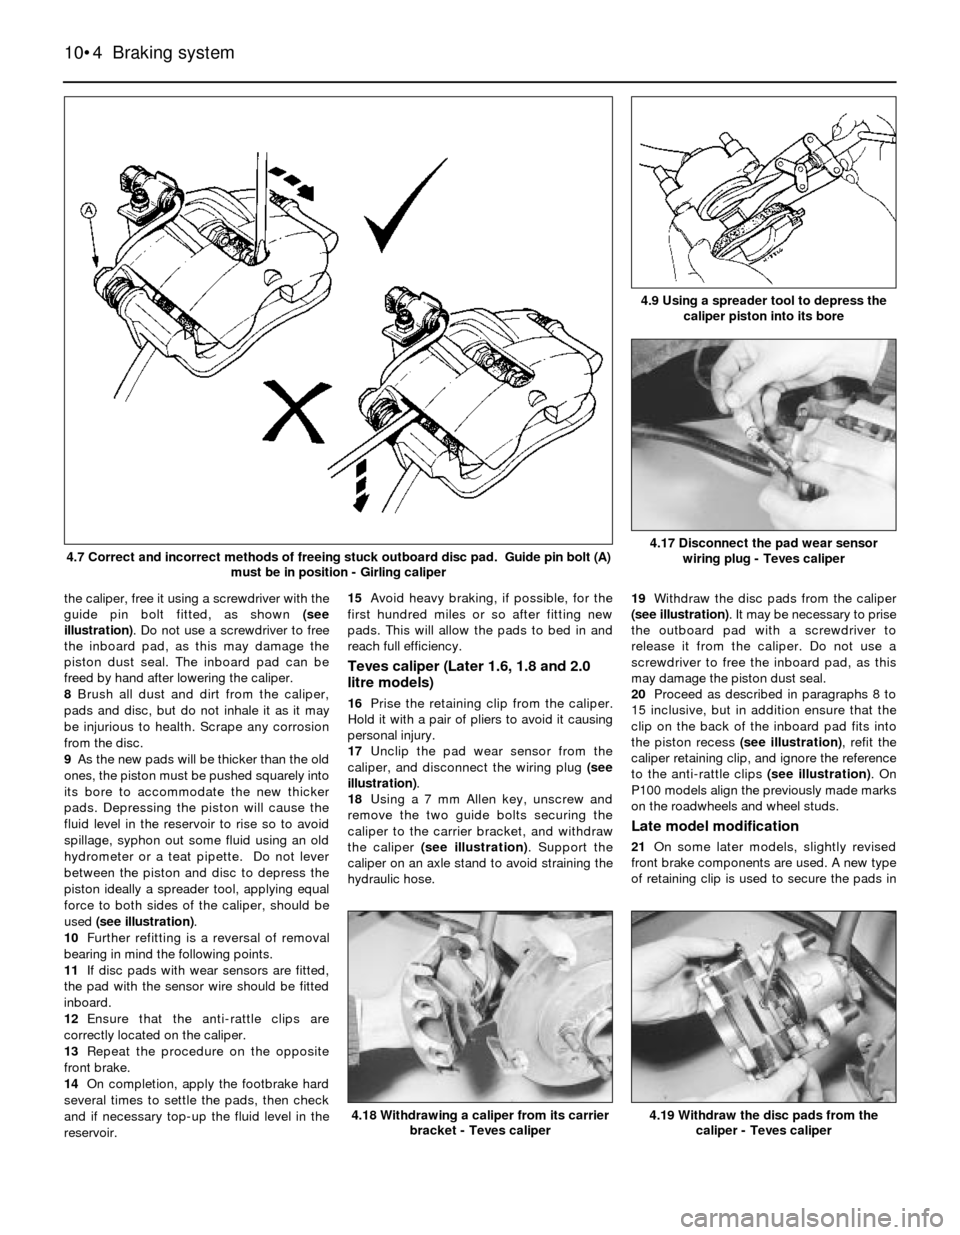 FORD SIERRA 1989 2.G Braking System Workshop Manual the caliper, free it using a screwdriver with the
guide pin bolt fitted, as shown (see
illustration). Do not use a screwdriver to free
the inboard pad, as this may damage the
piston dust seal. The inb